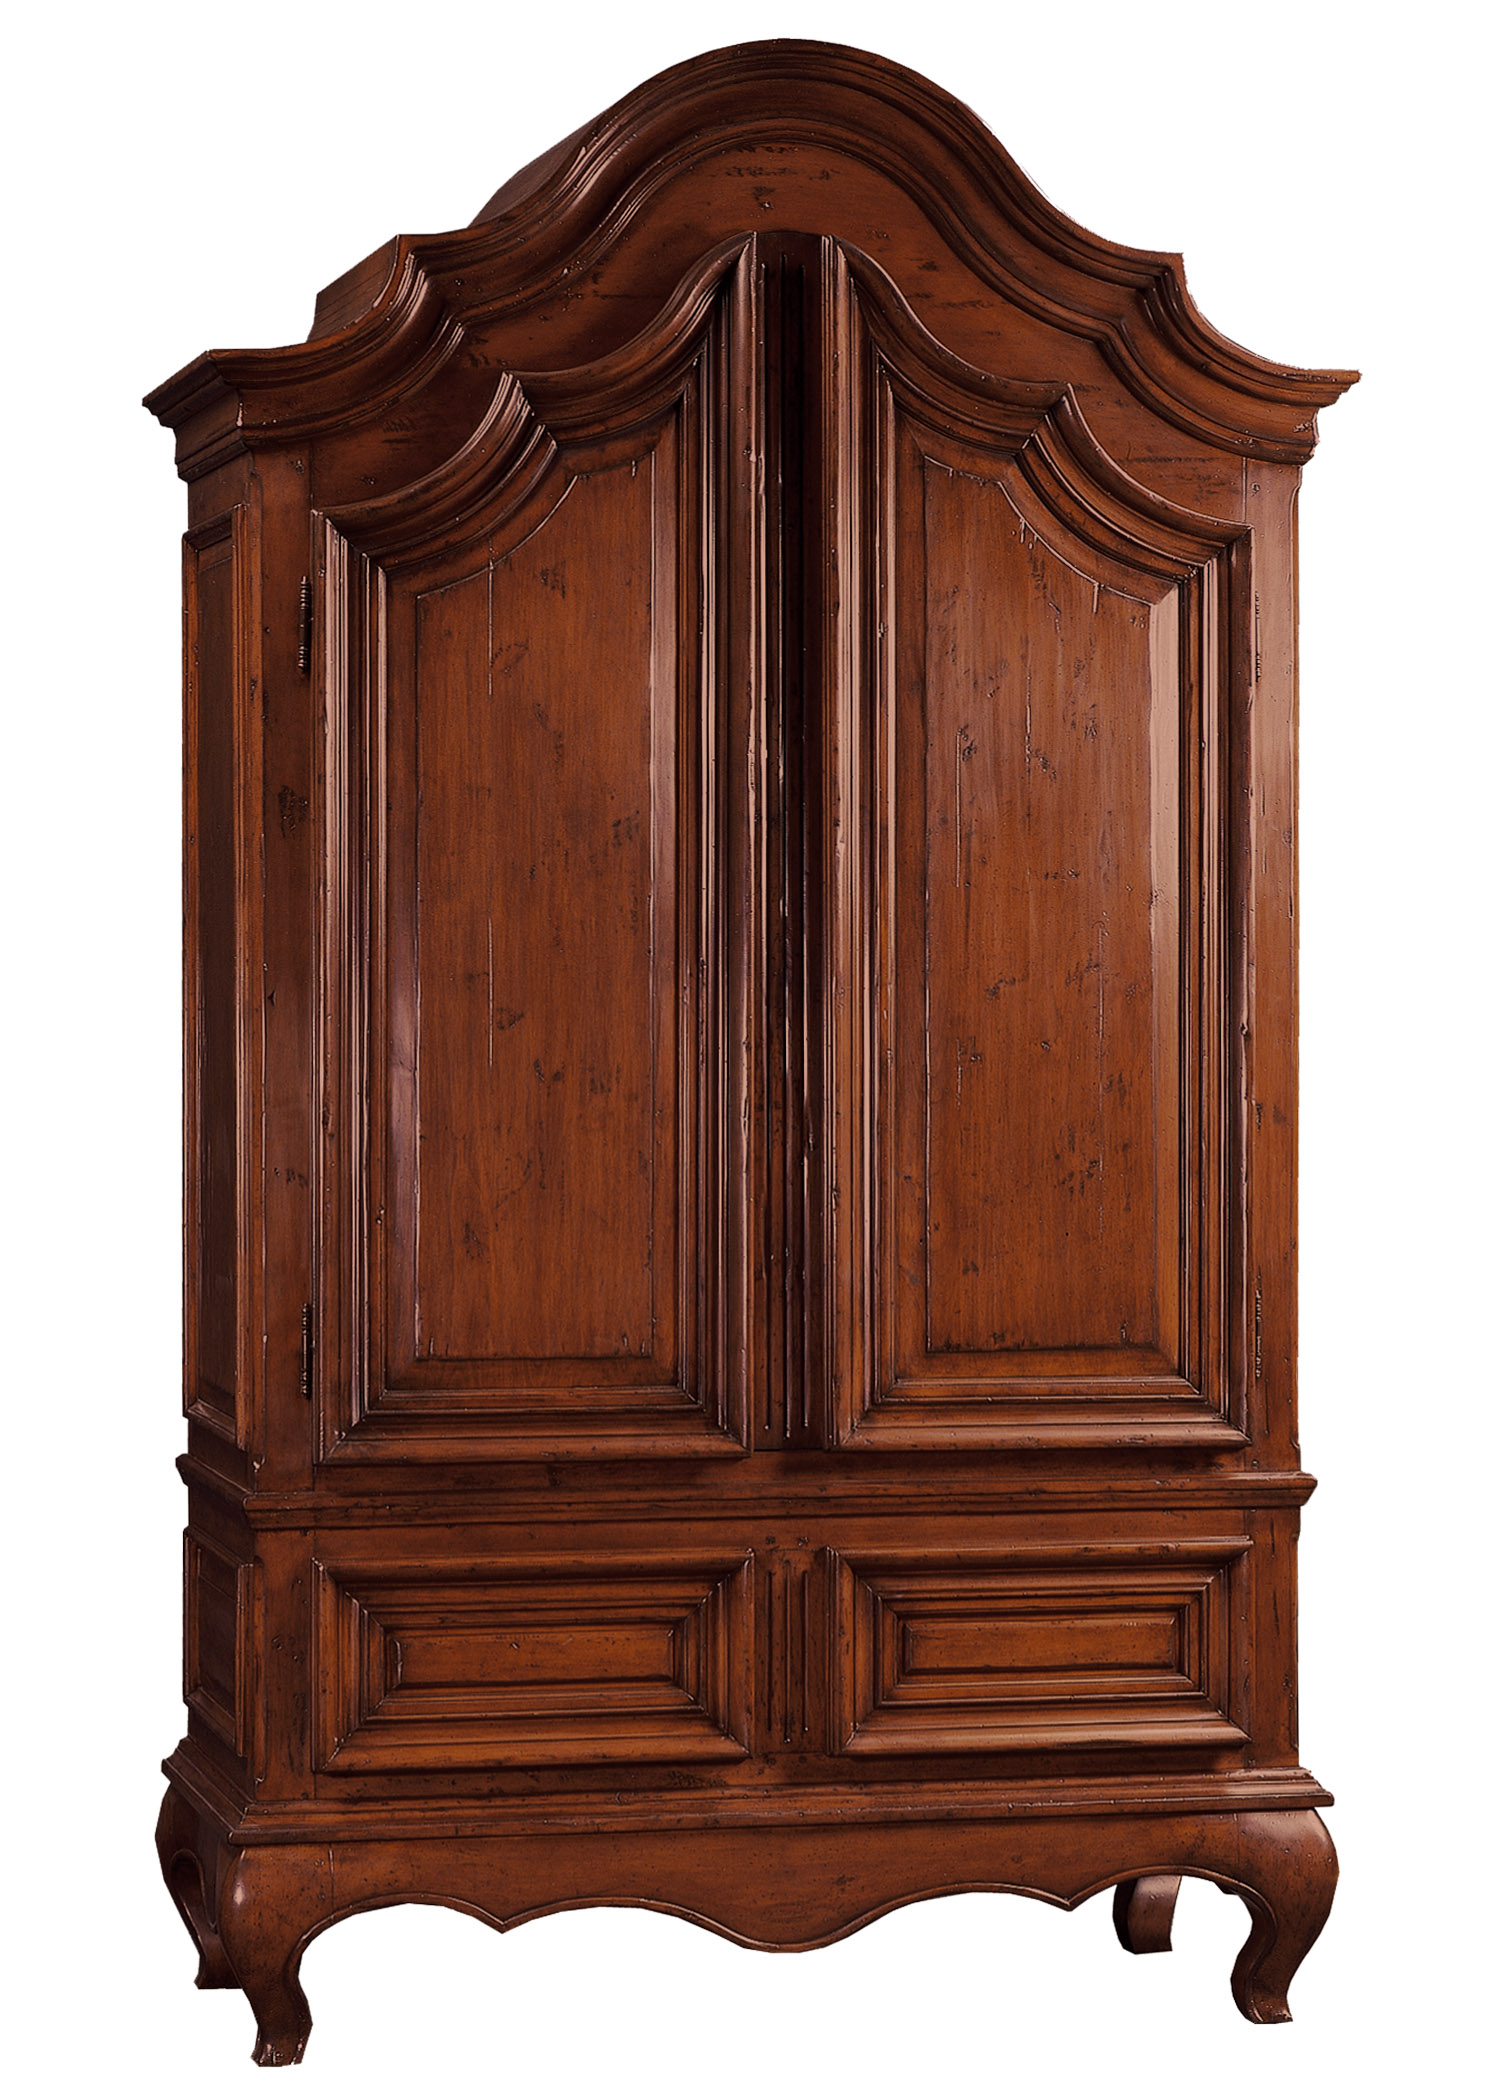 Hawthorne traditional armoire cabinet with two doors, shelves and two drawers on the bottom by Woodland Furniture in Idaho Falls